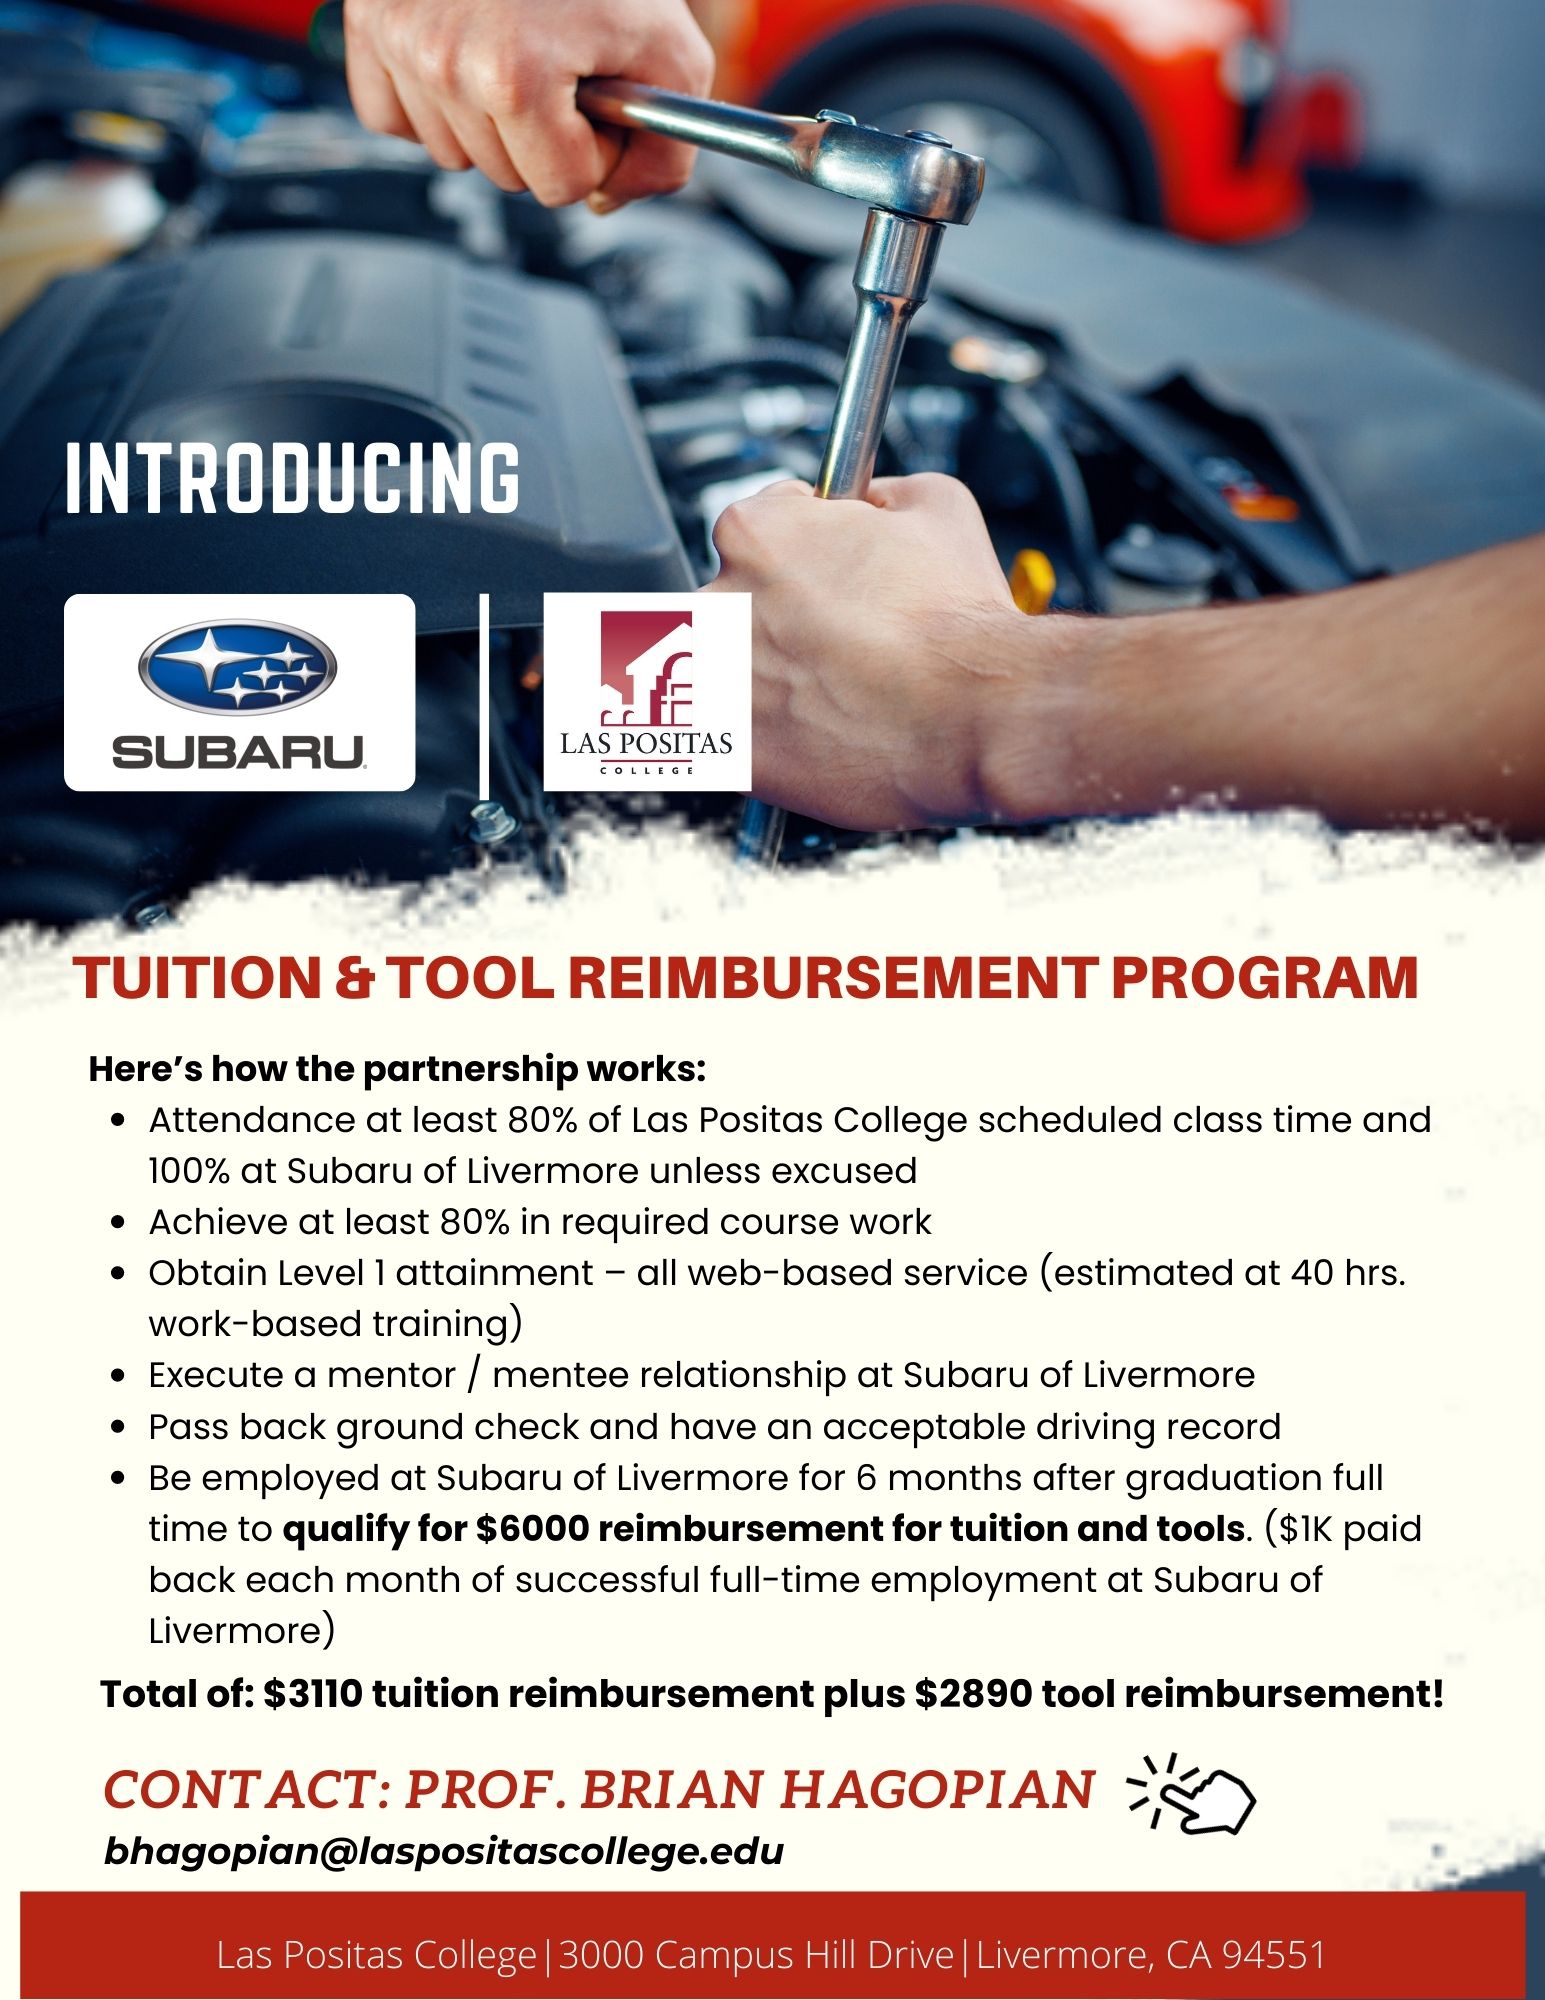 Tuition and tool program